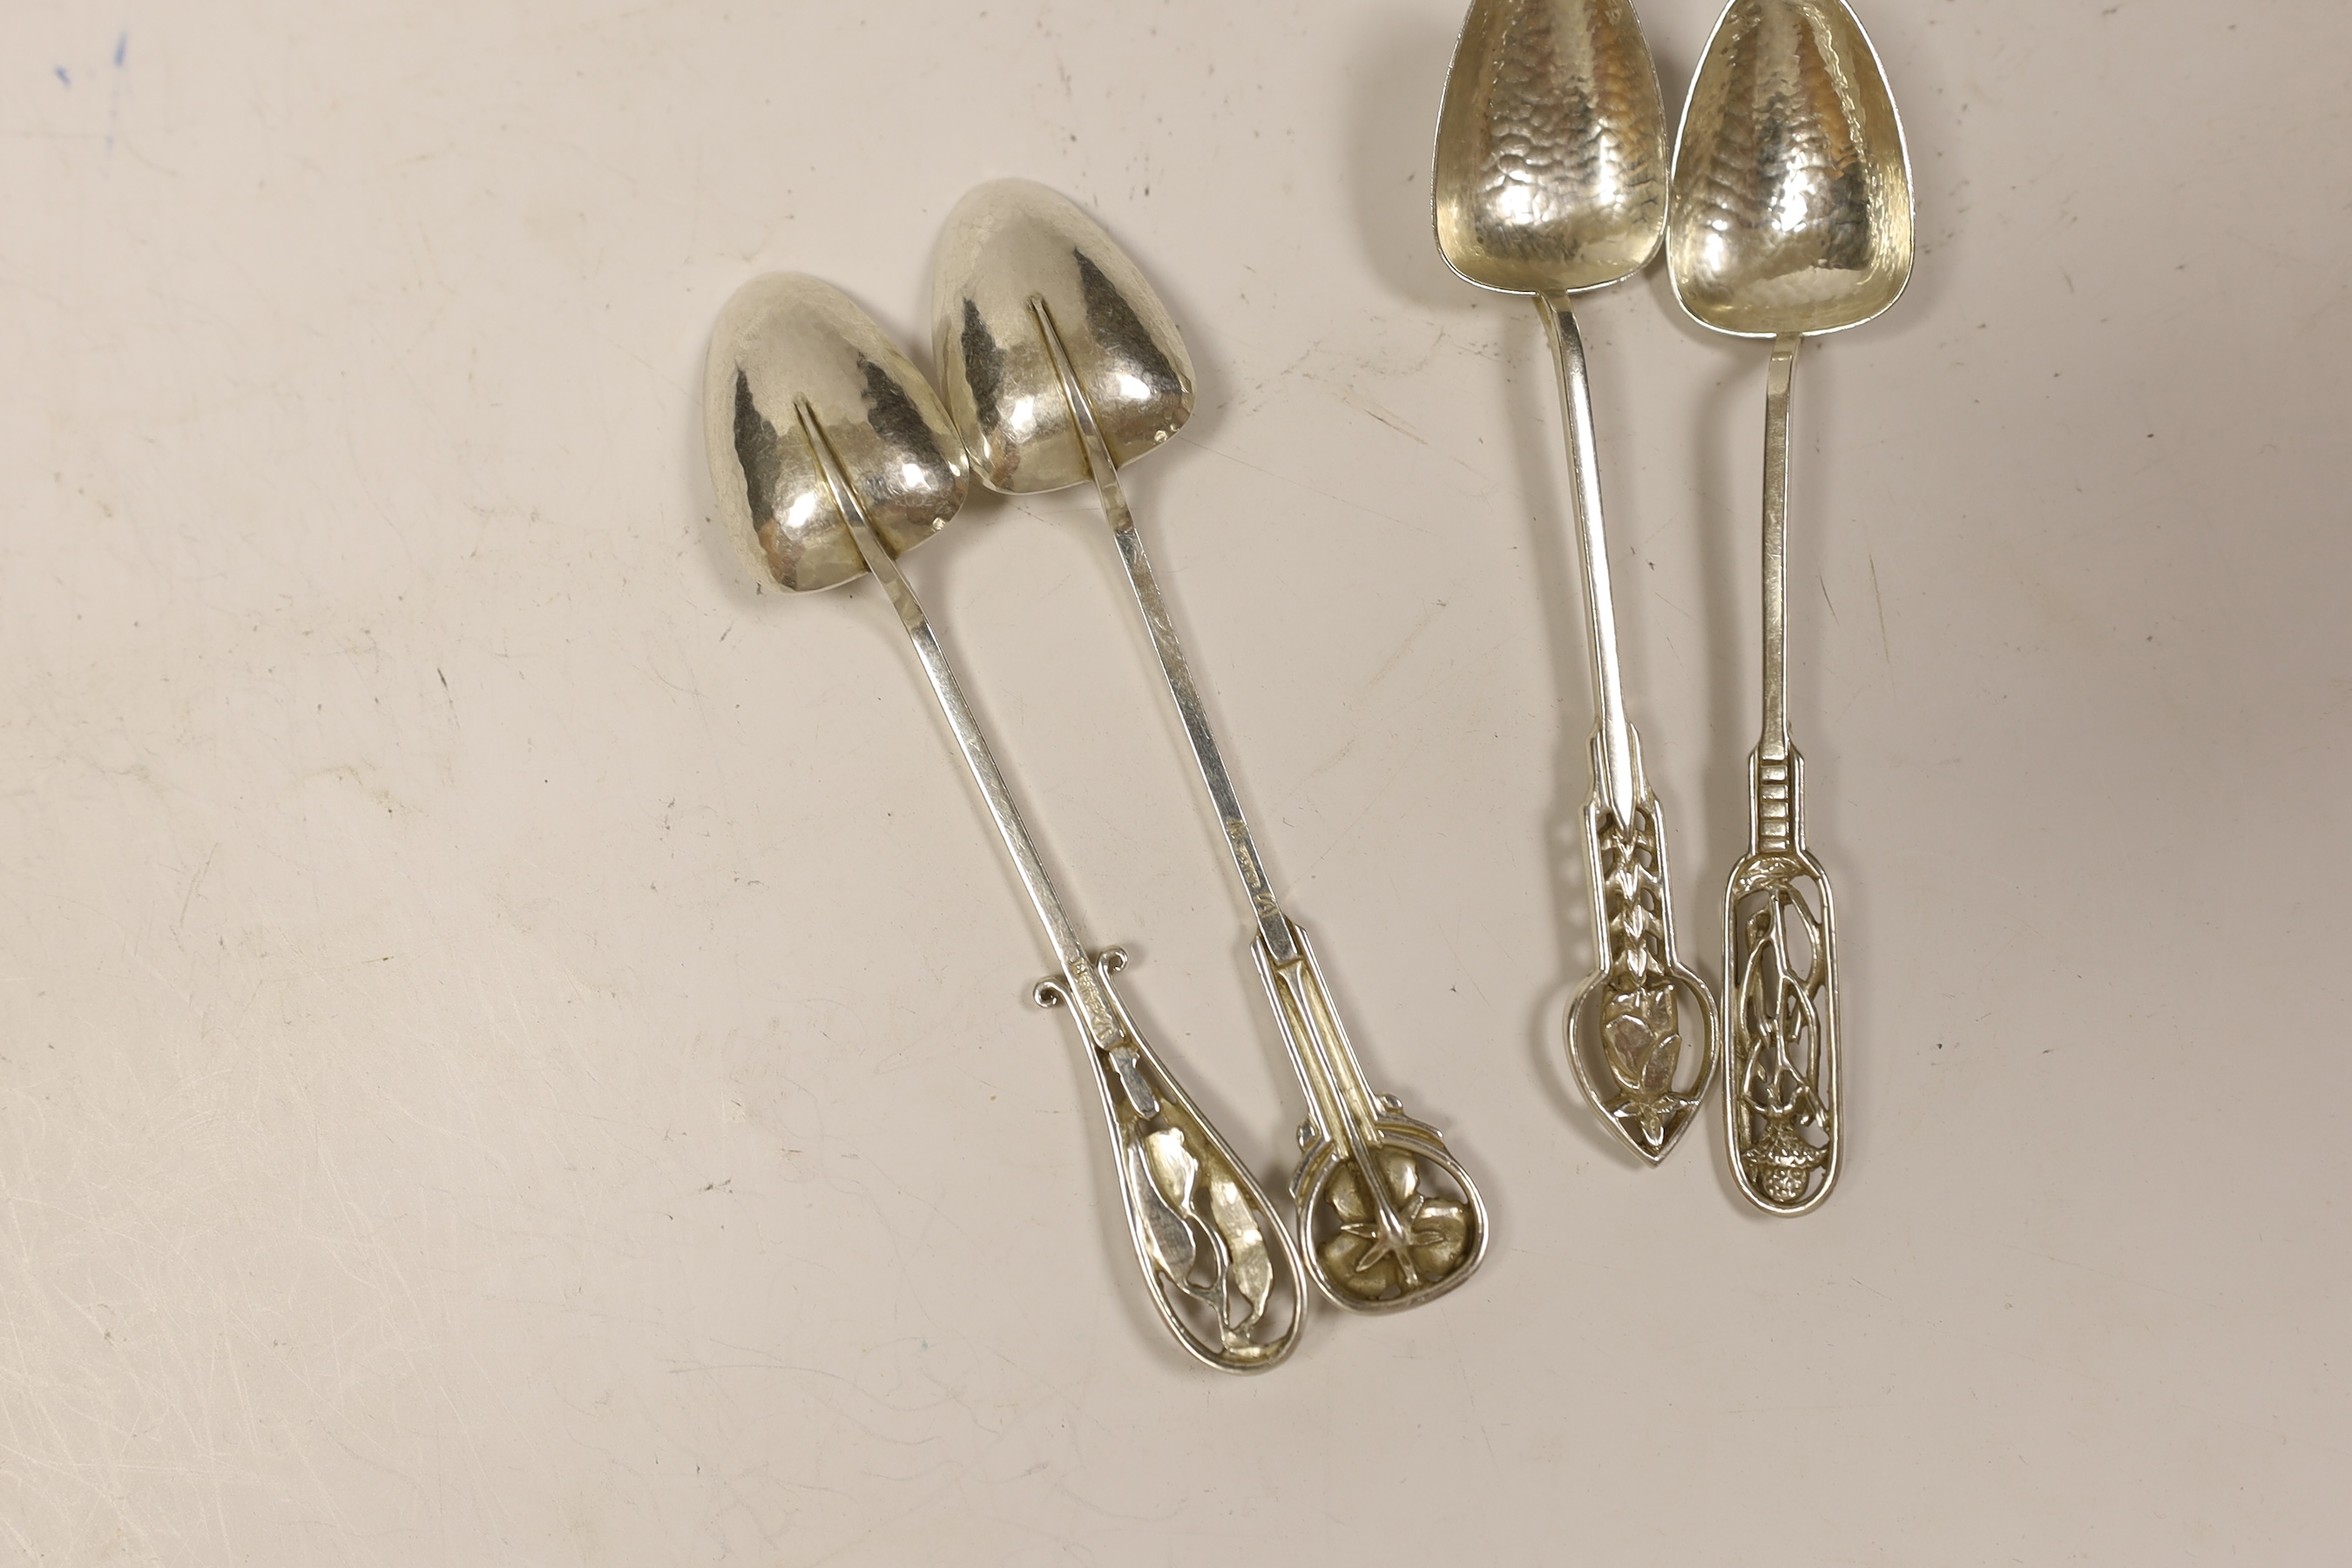 Four assorted Australian sterling spoons, by James A. Linton, 11cm